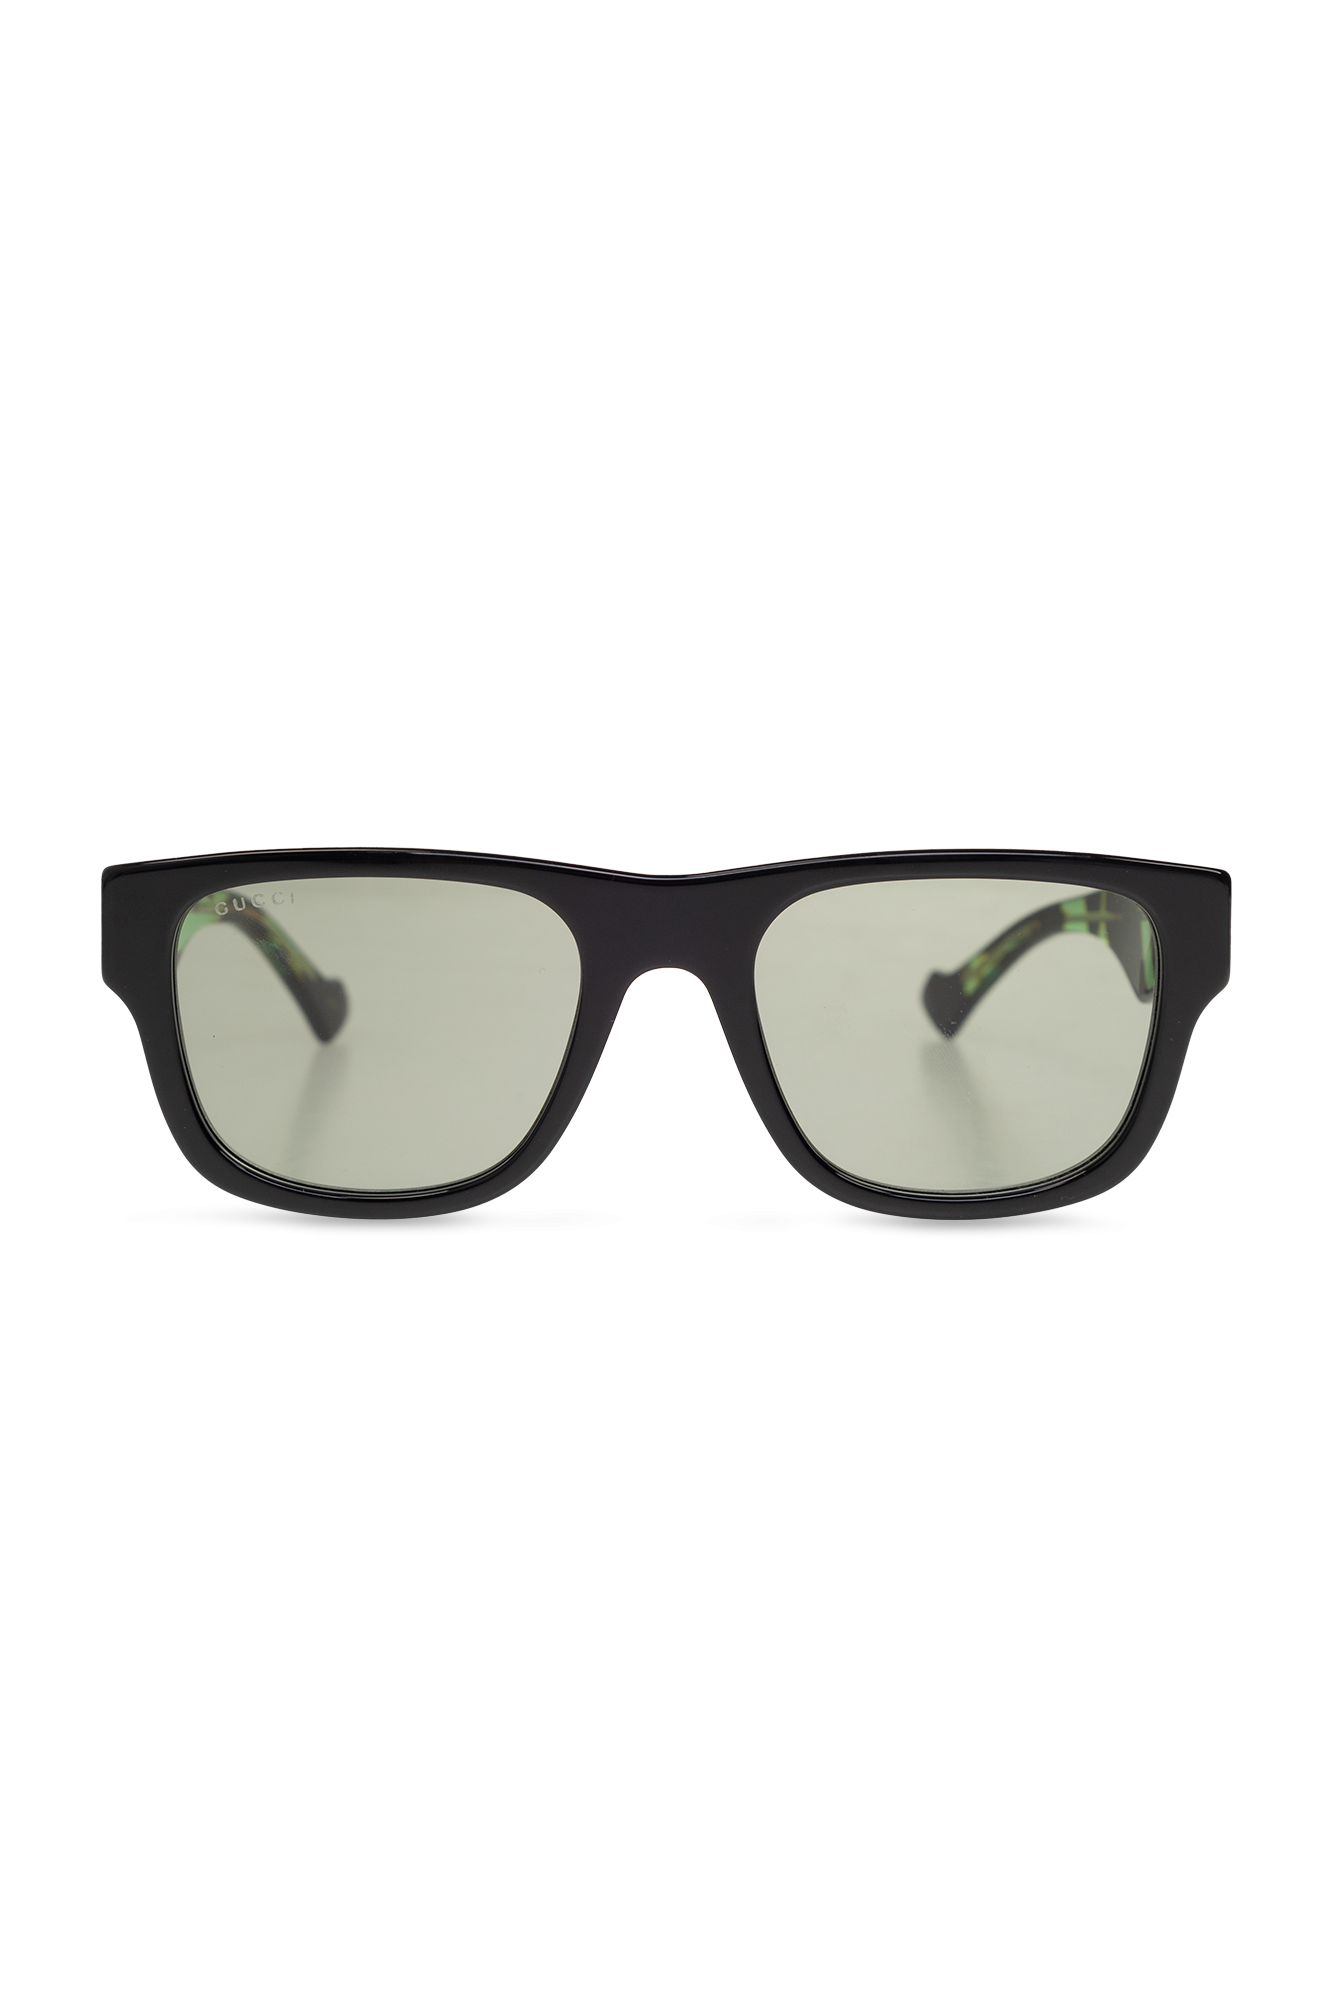 Ray-Ban clubmaster sunglasses in black 0RB3016